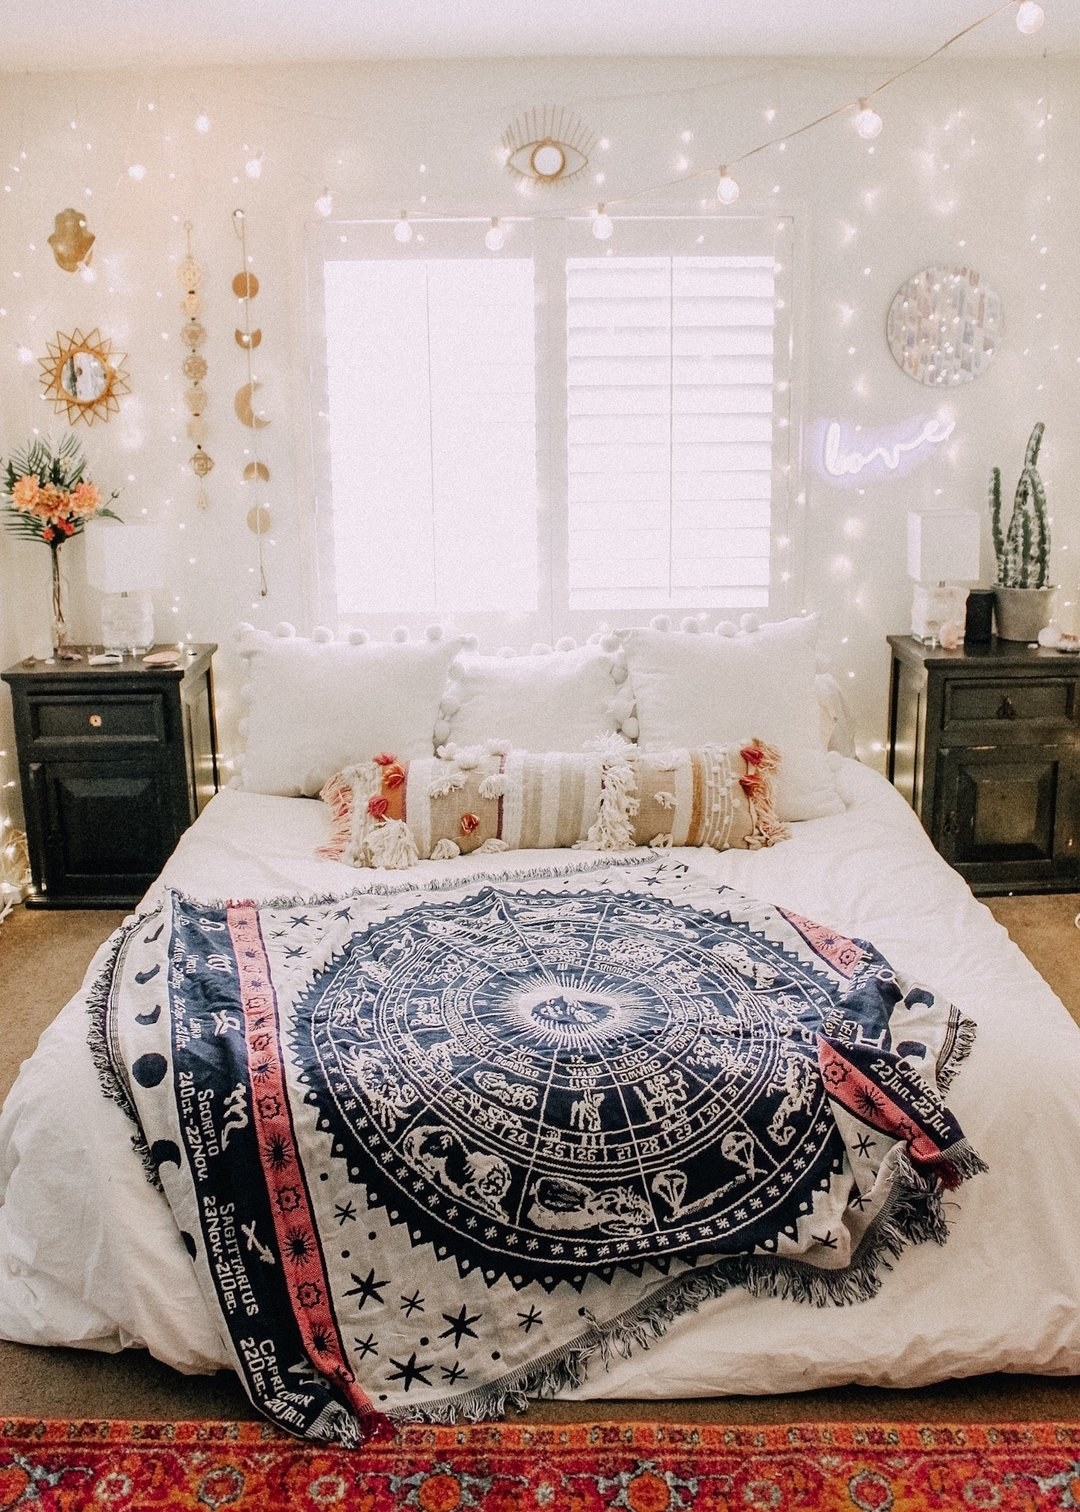 19 Boho-Chic Decor Items For Under $50 That You Need In Your Life